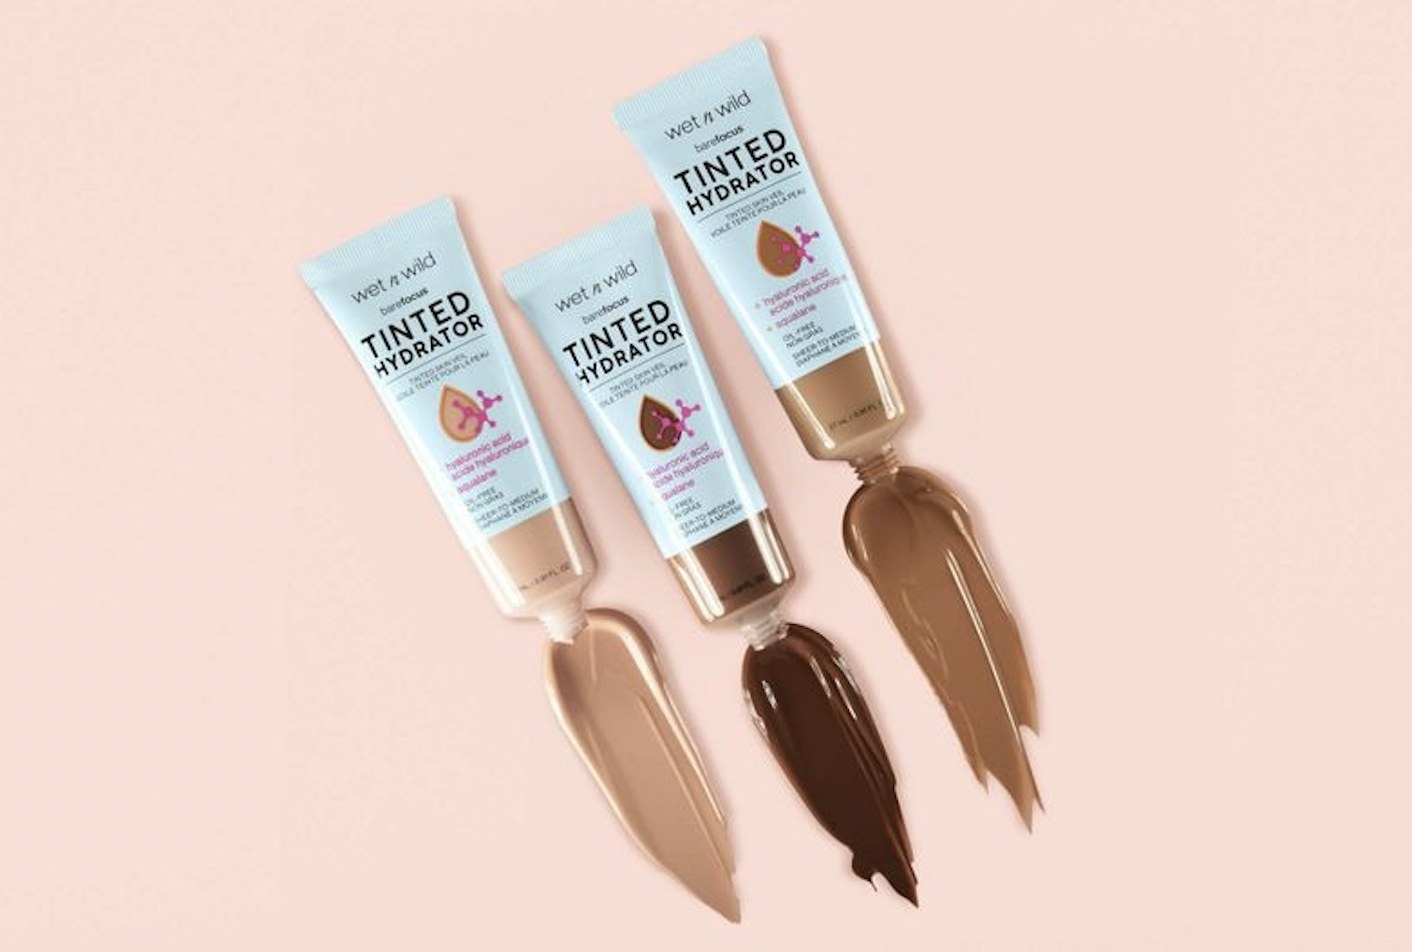 A trio of tinted moisturizers